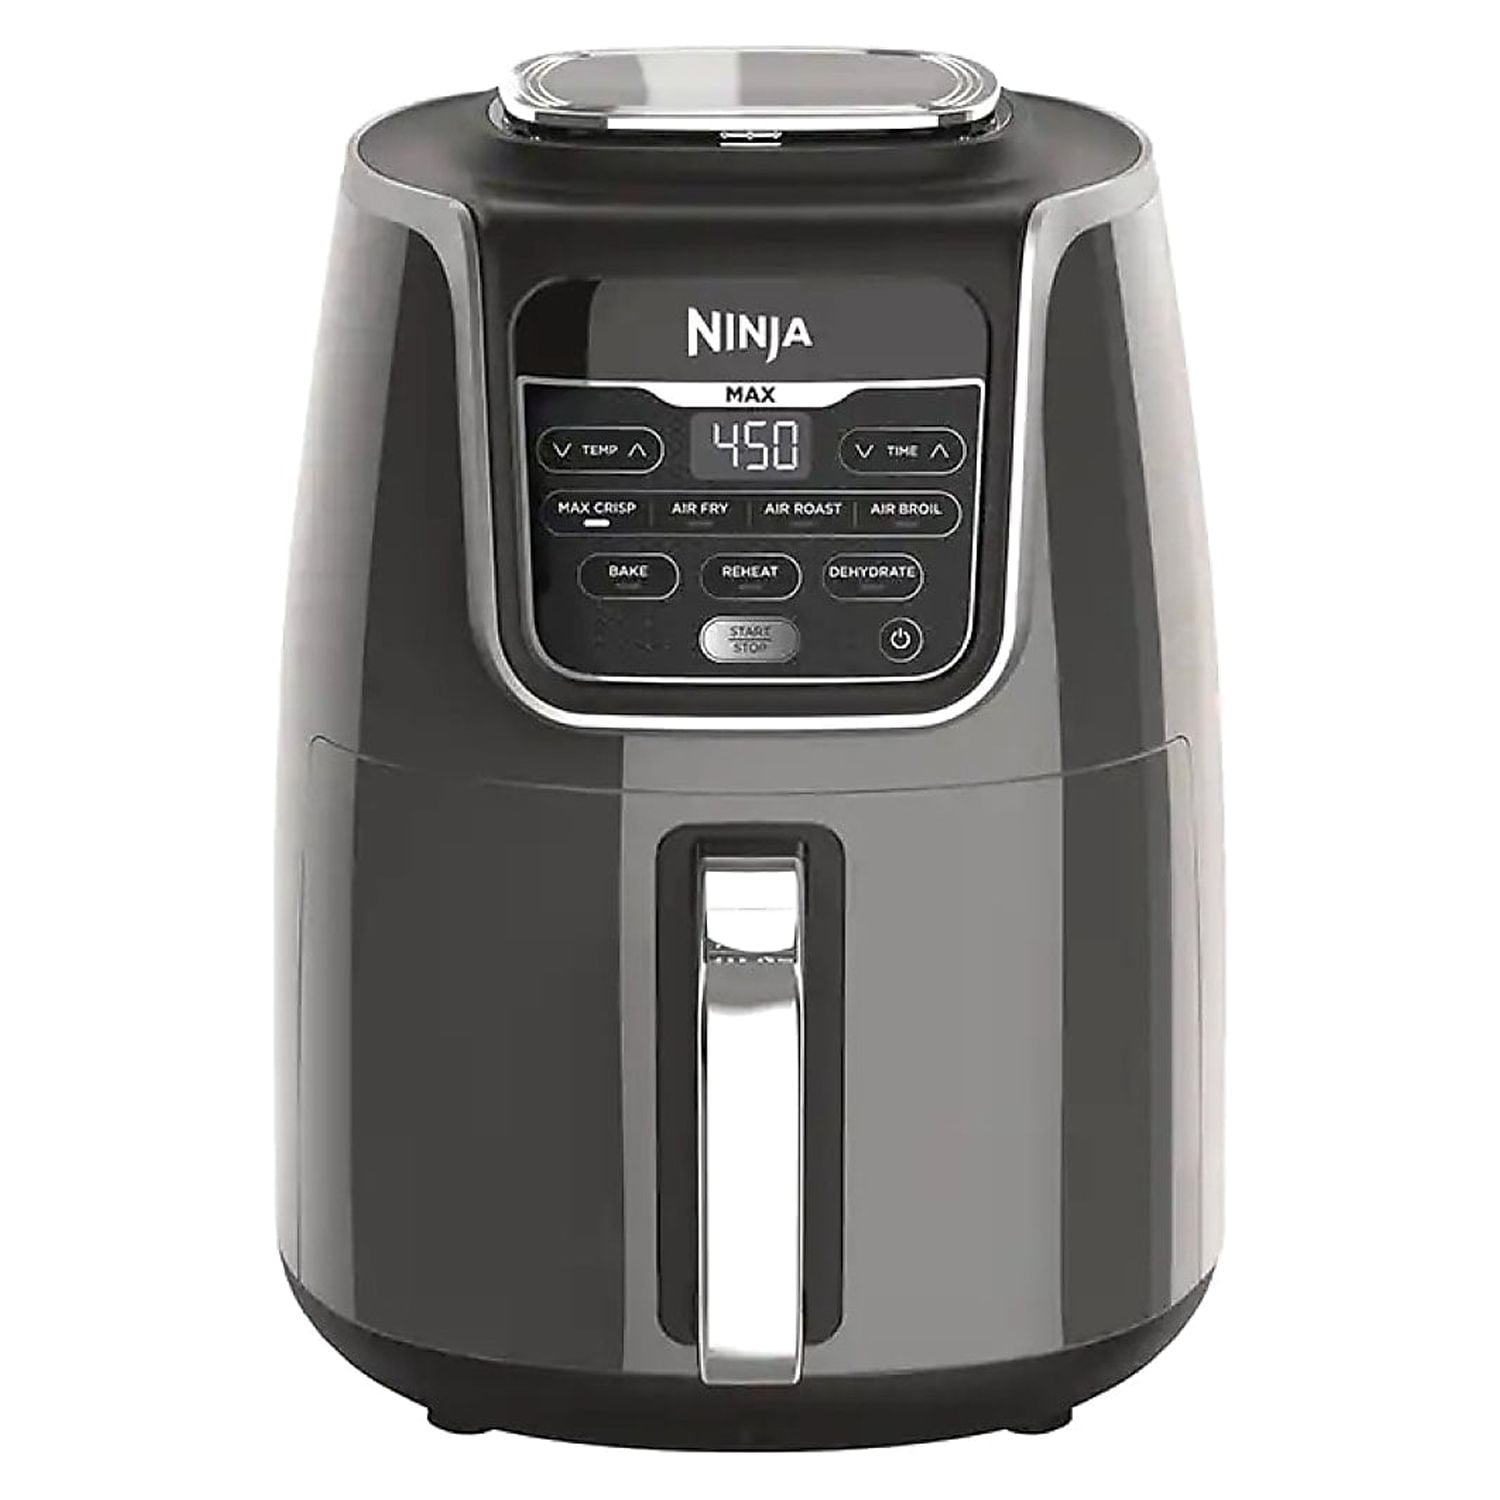 Ninja's new dual air fryer makes 'life so much easier' and has £60 off